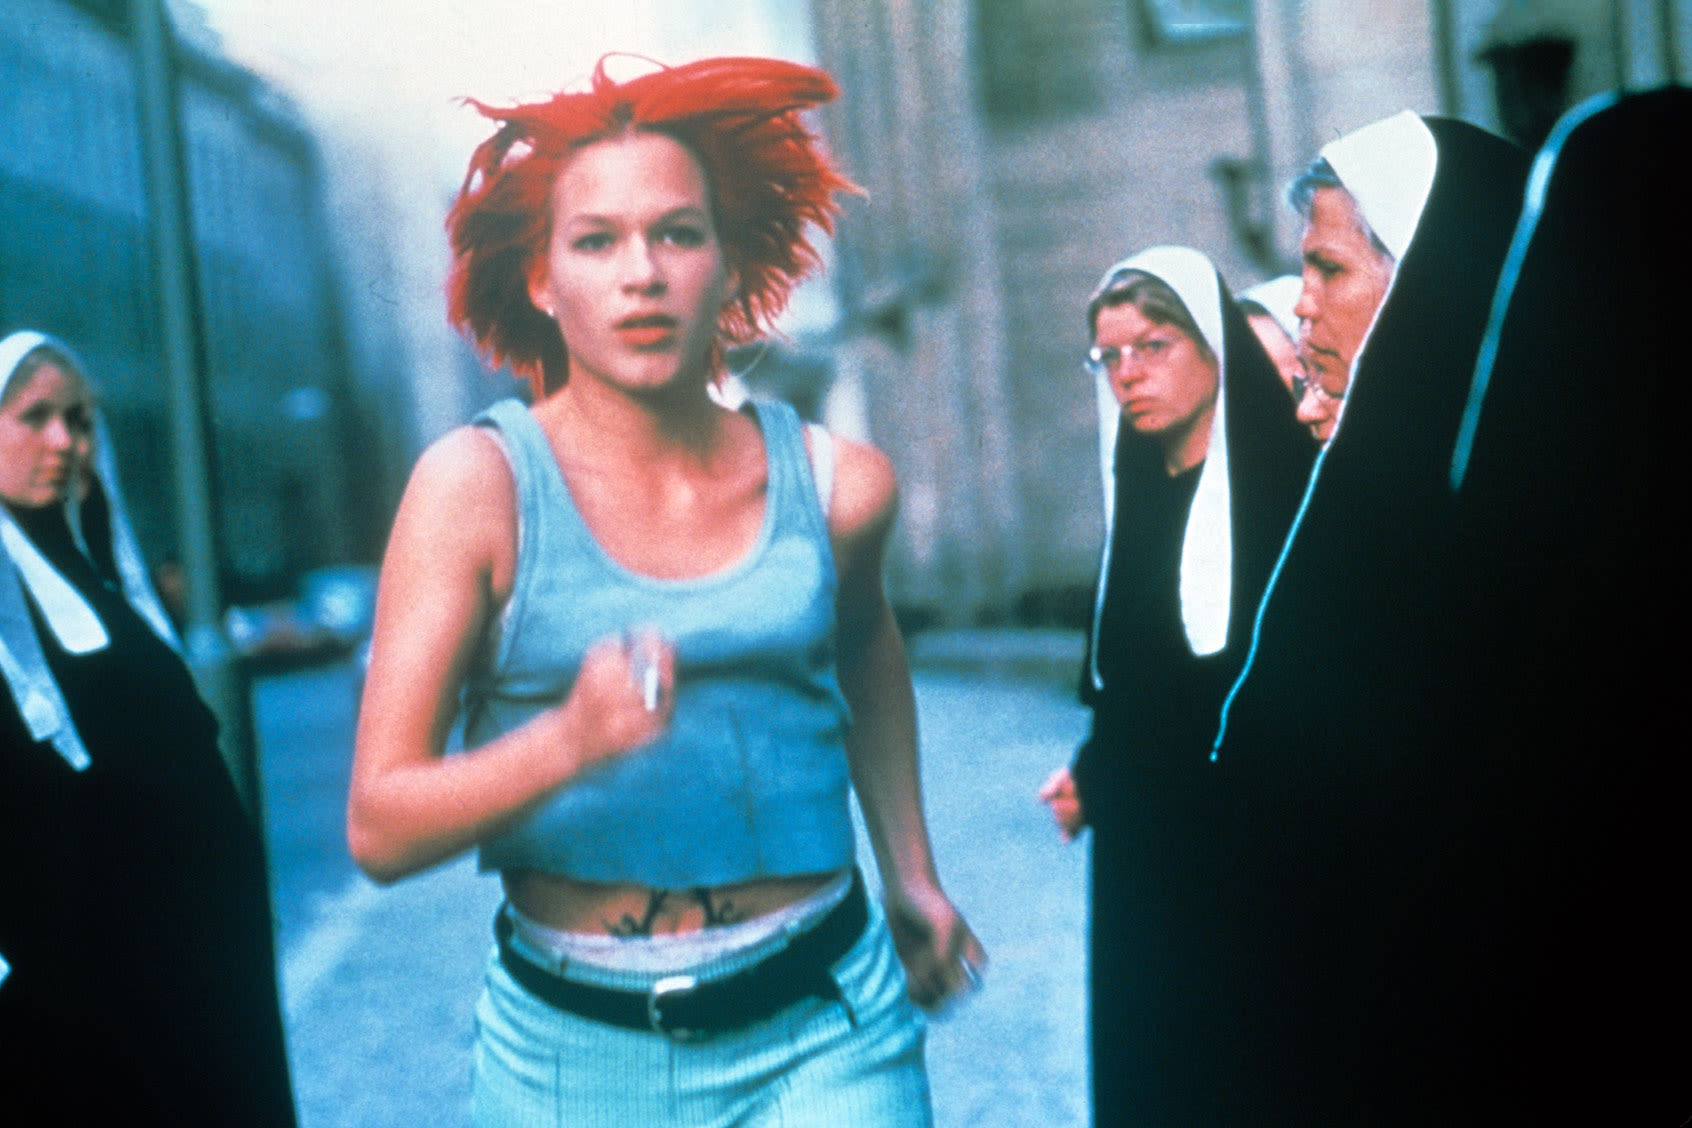 "If you’re late, your life could be totally different": Recalling "Run Lola Run" 25 years later